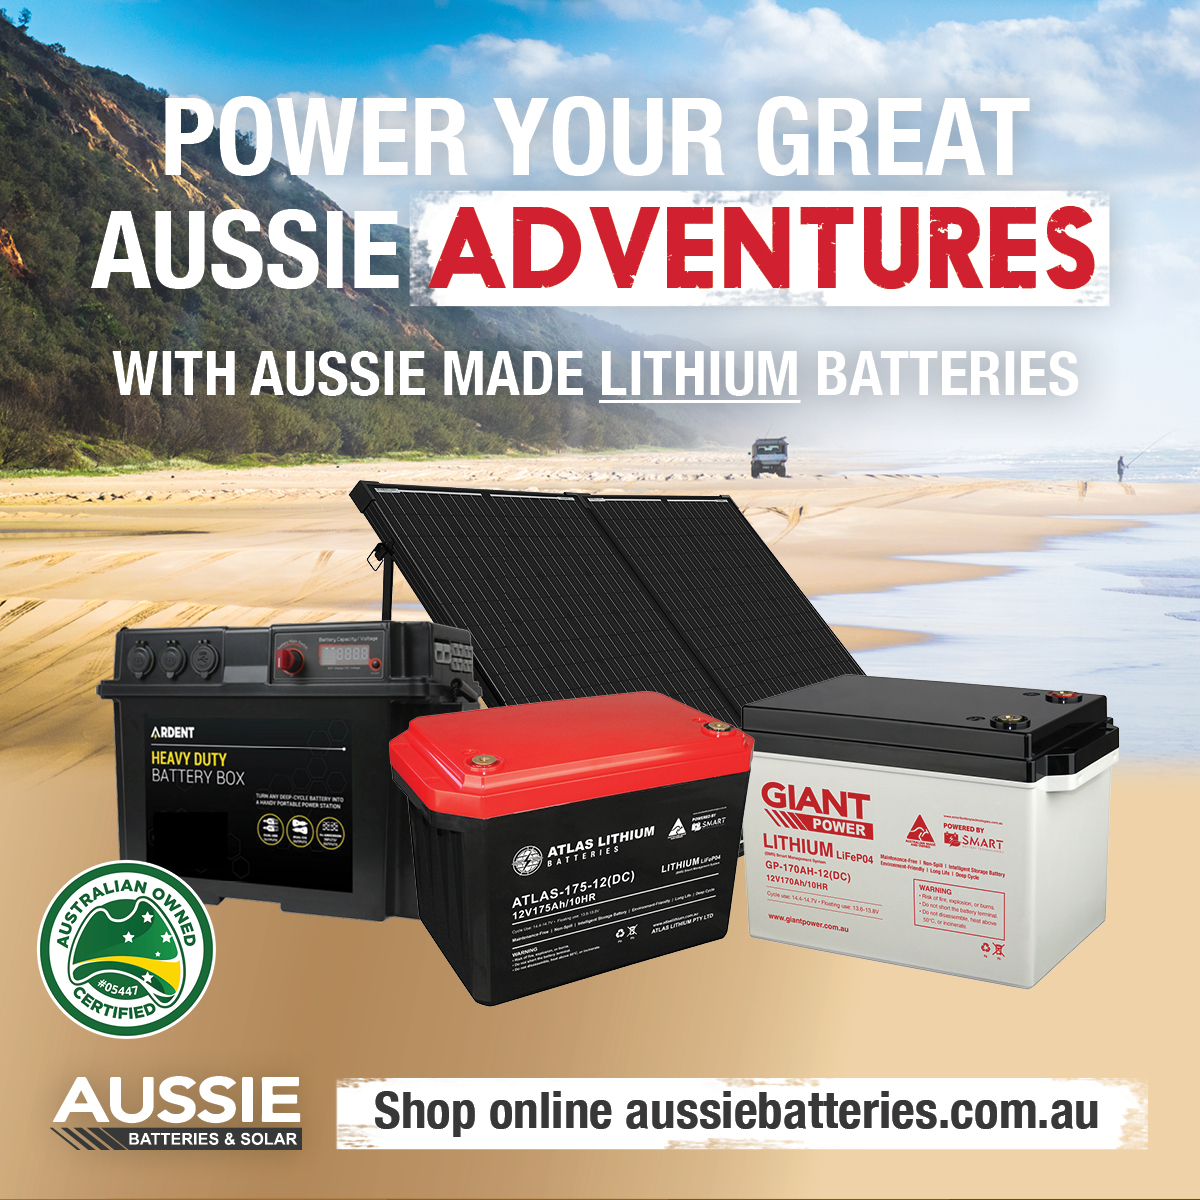 Aussie Batteries and Solar Deep Cycle Battery Guide